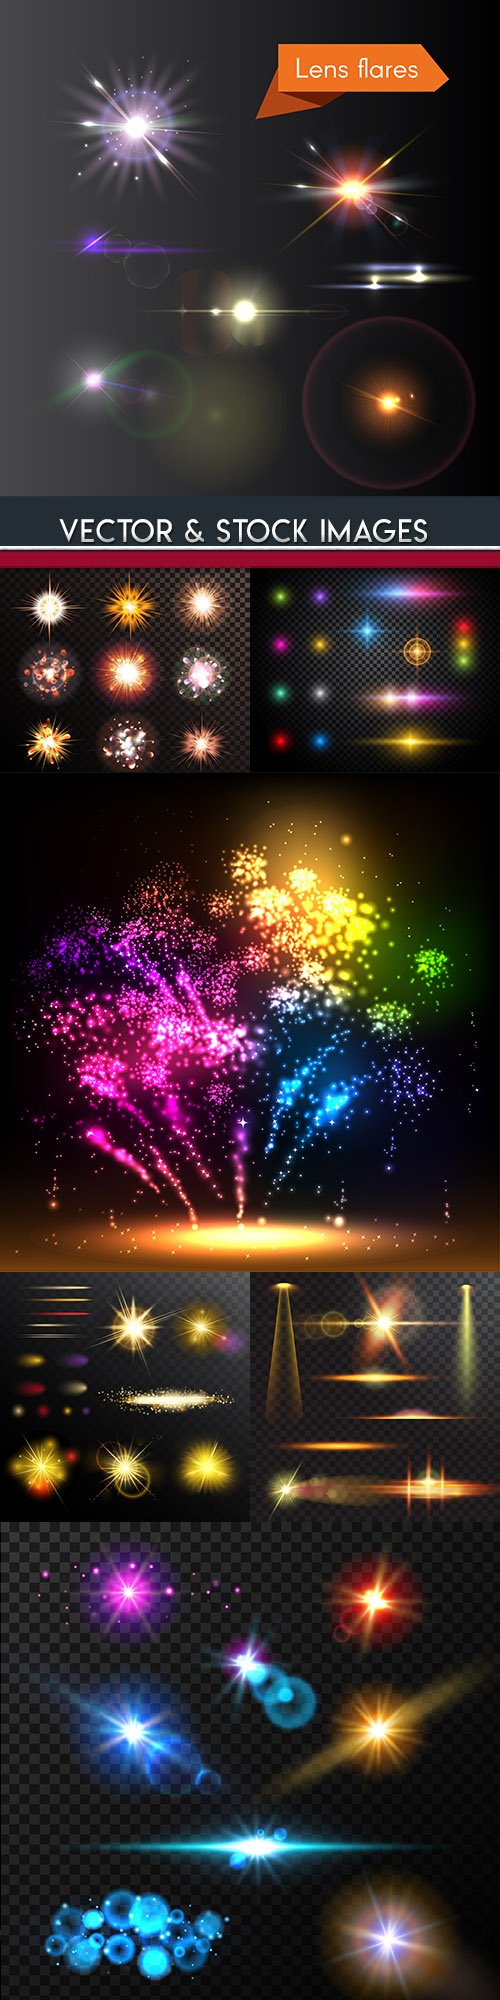 Bright lighting effects collection of design 23